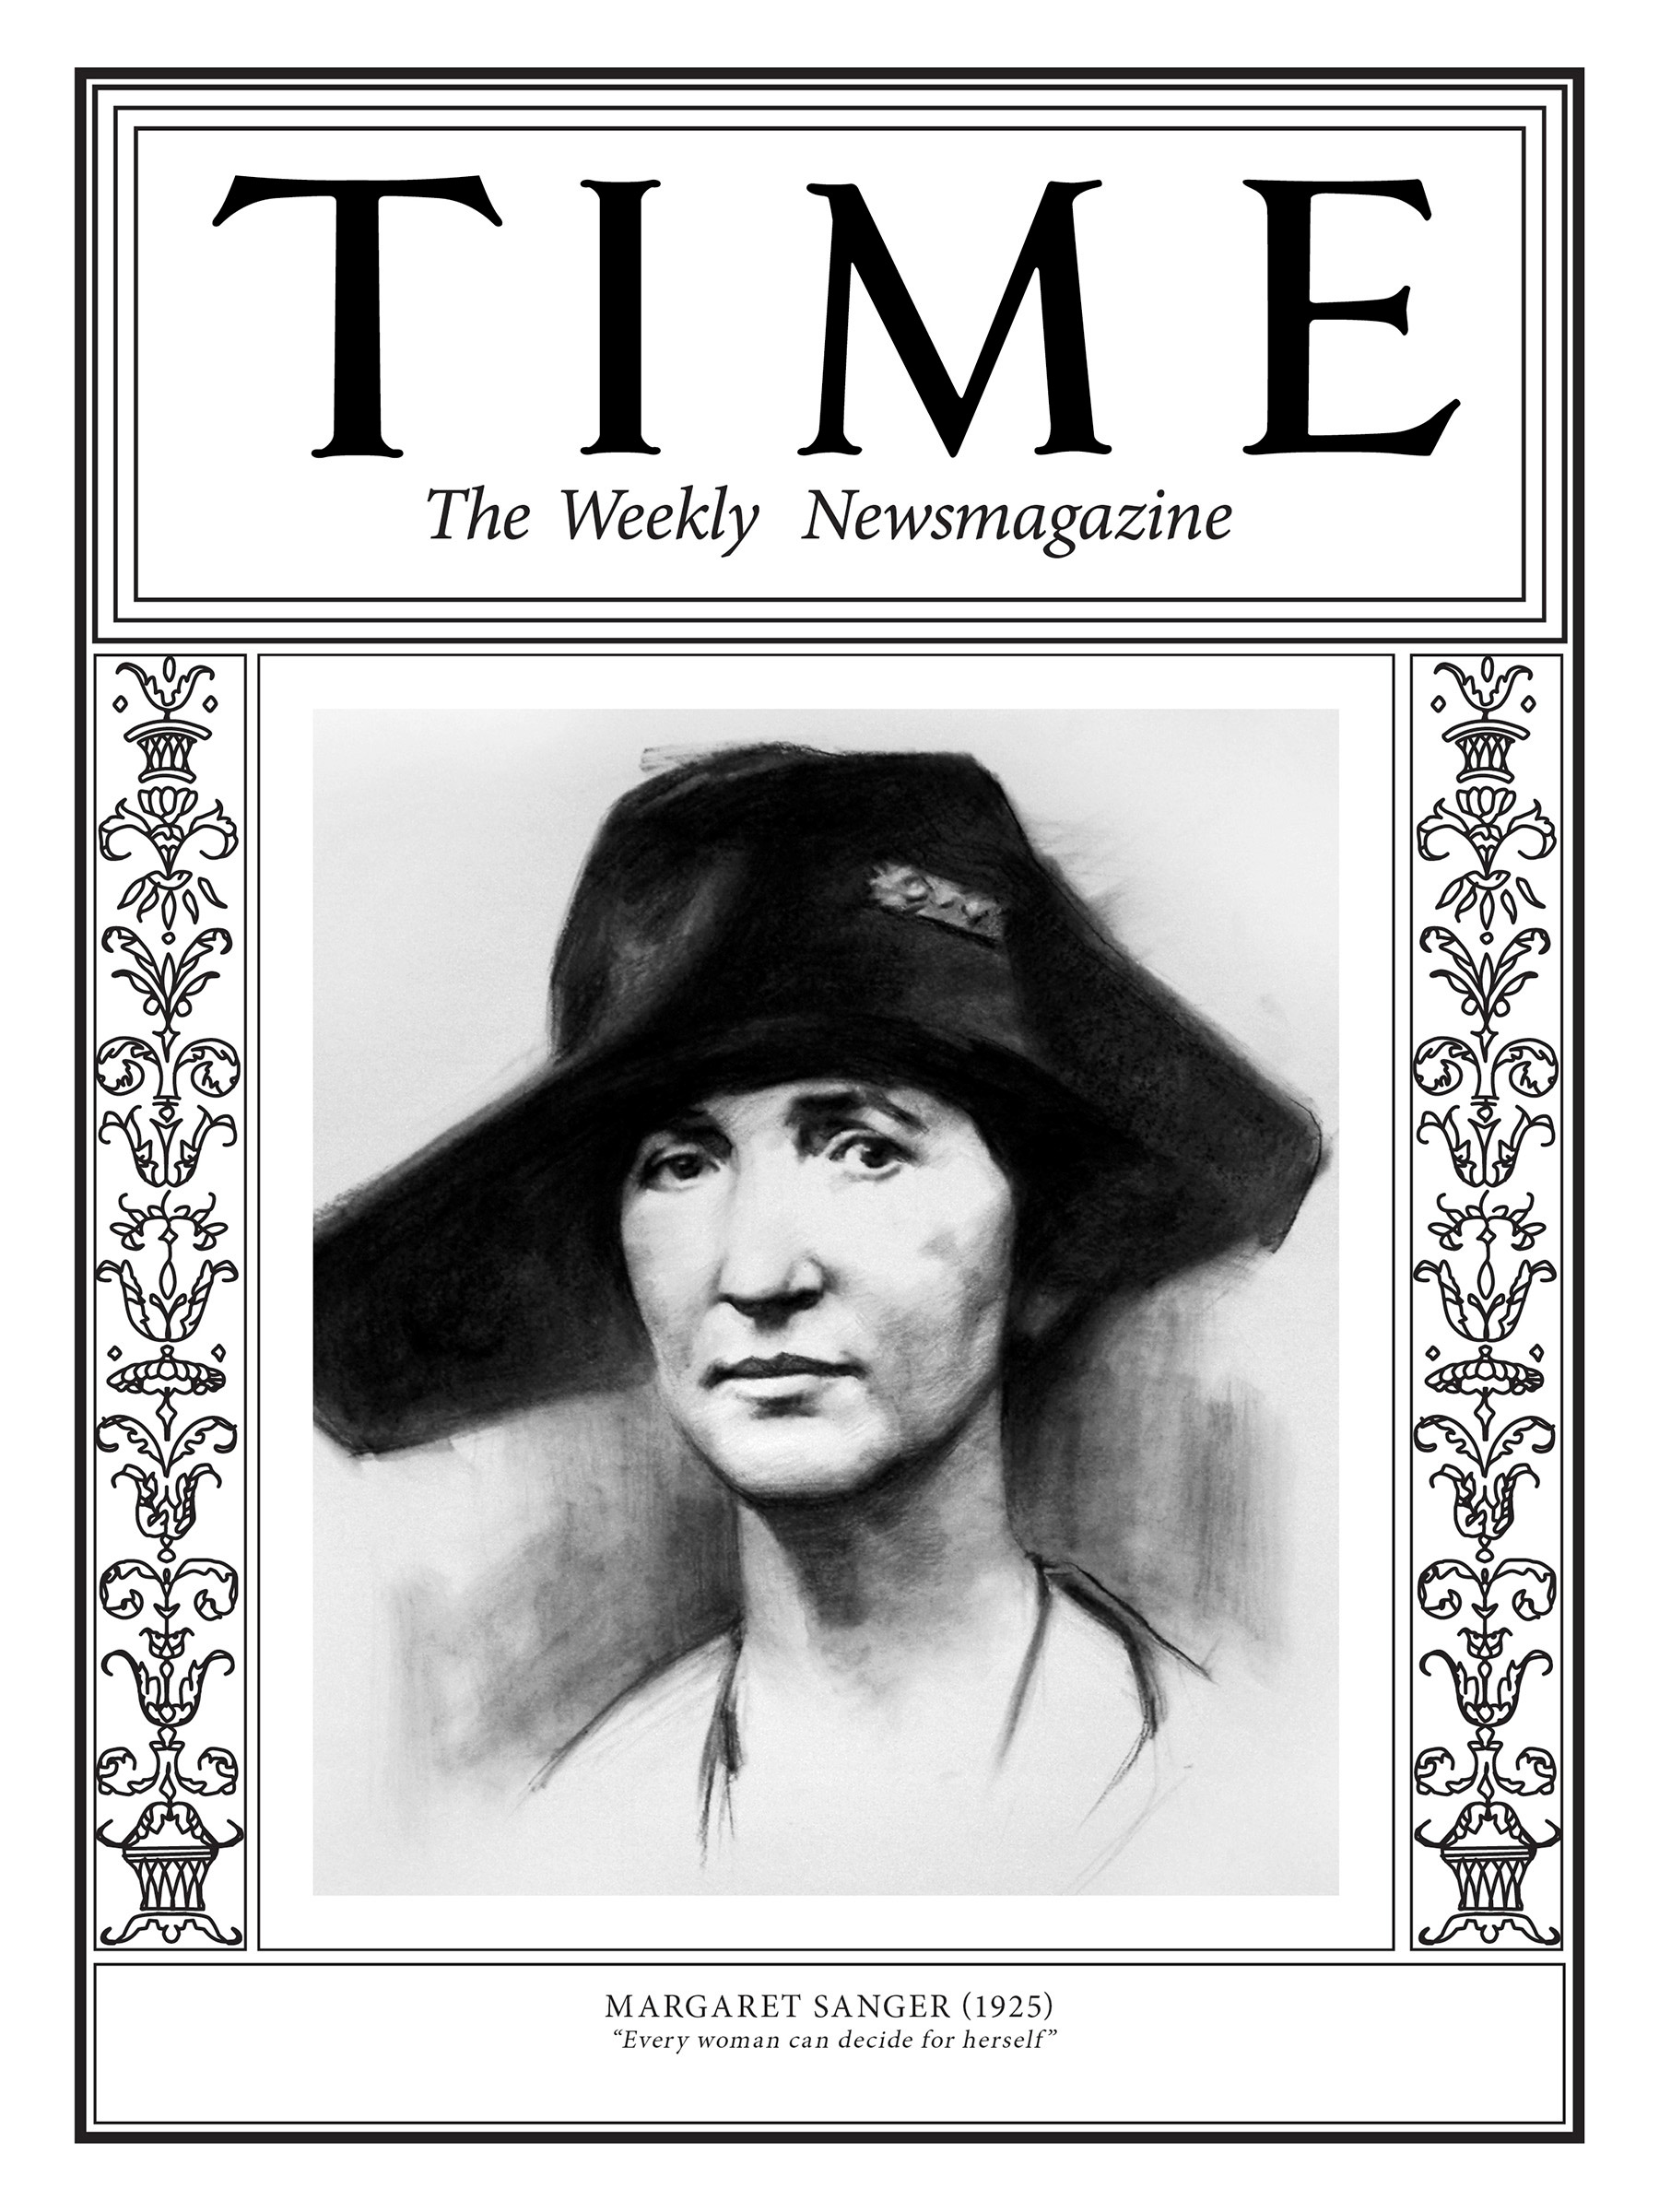 <a href="https://fineartamerica.com/featured/margaret-sanger-1925-time.html"><strong>Buy the cover art→</strong></a> (Illustration by Matt Smith for TIME; GPA/Getty)